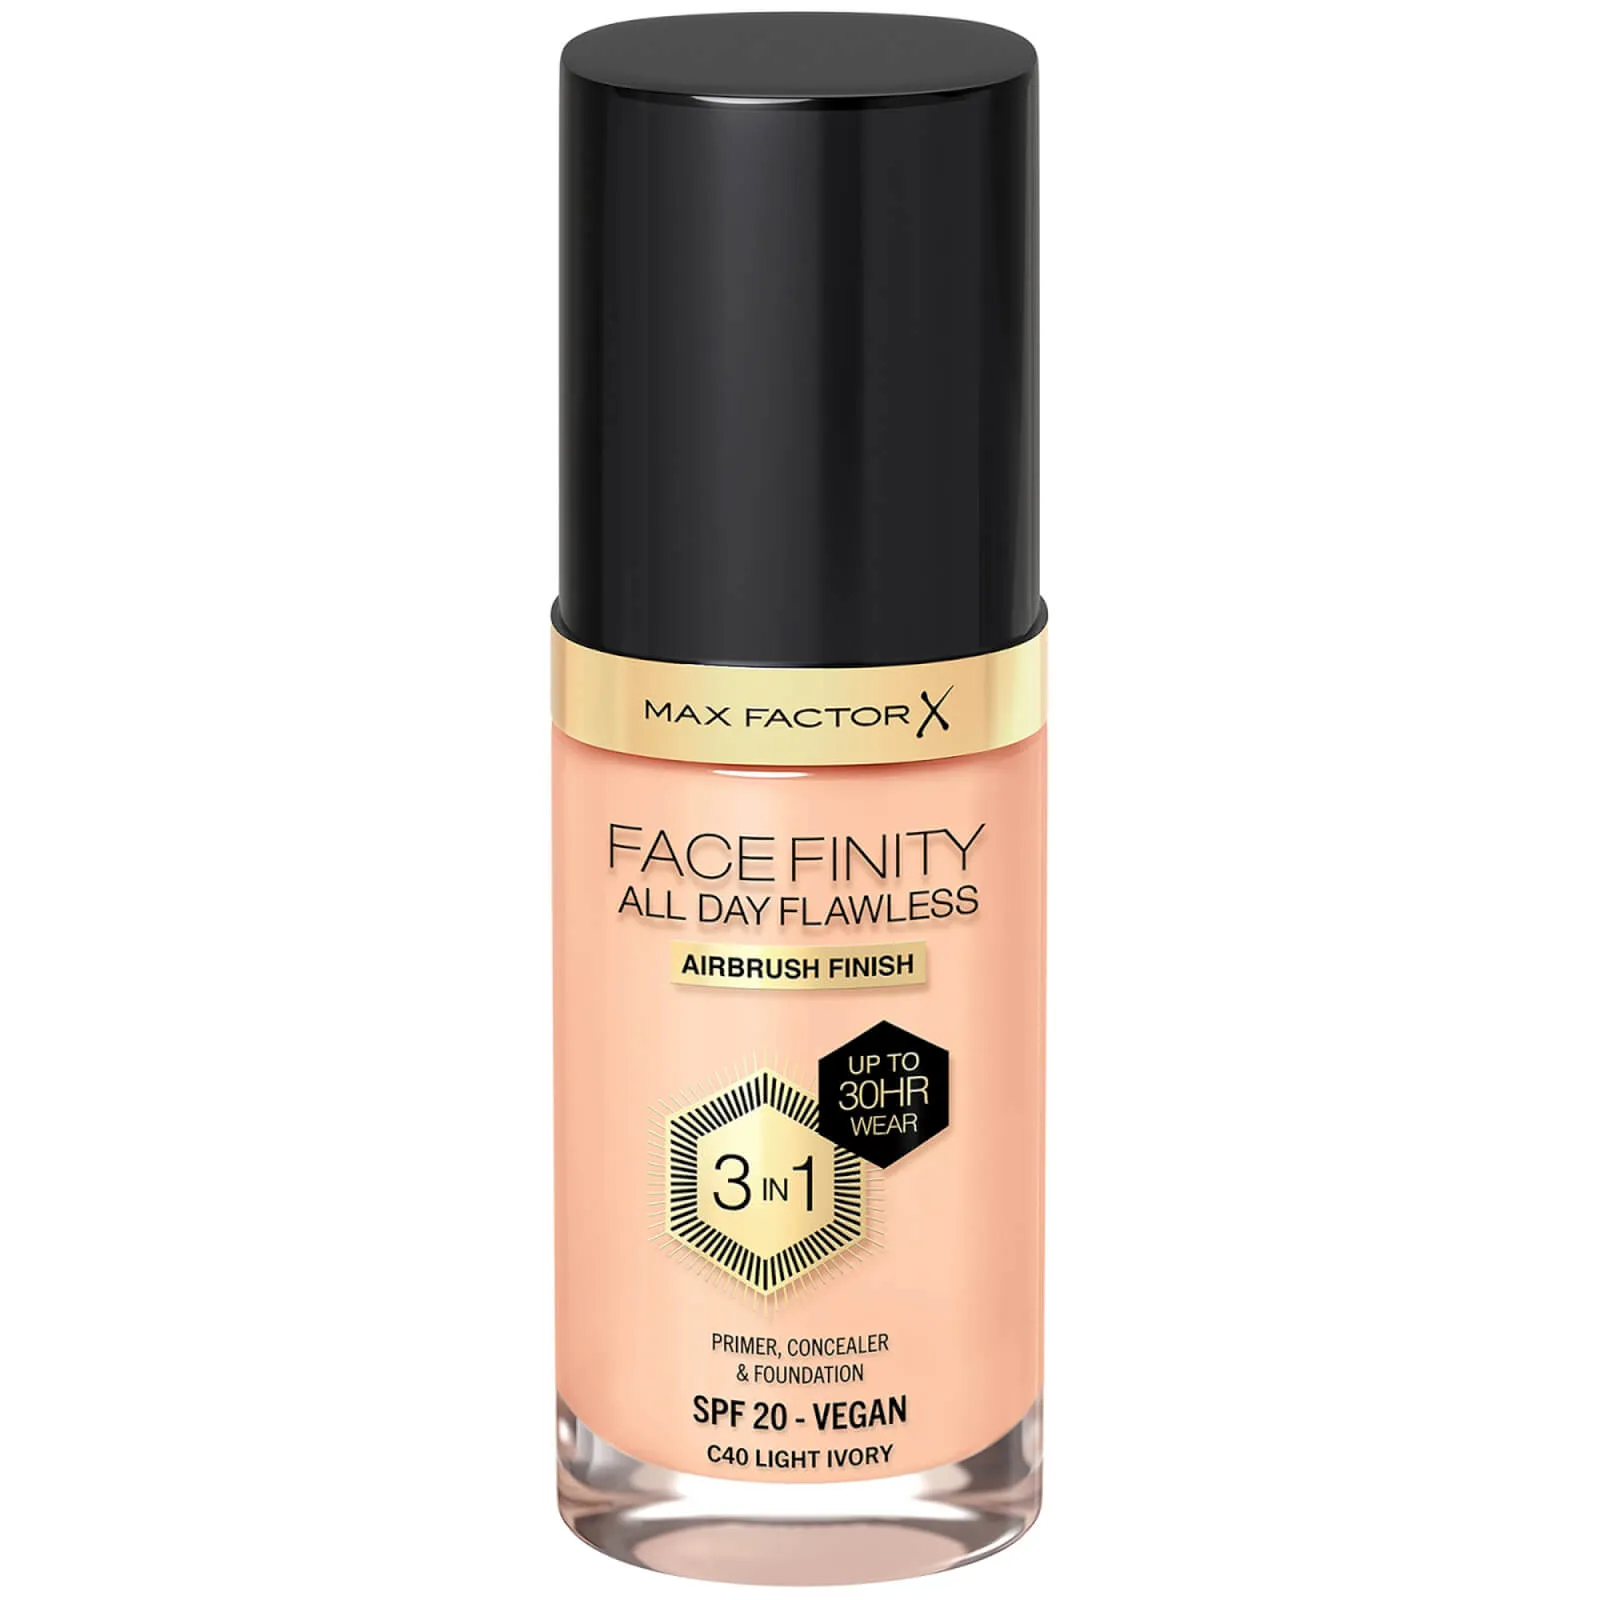  Facefinity All Day Flawless 3 in 1 Vegan Foundation 30ml (Various Shades) - C40 - LIGHT IVORY